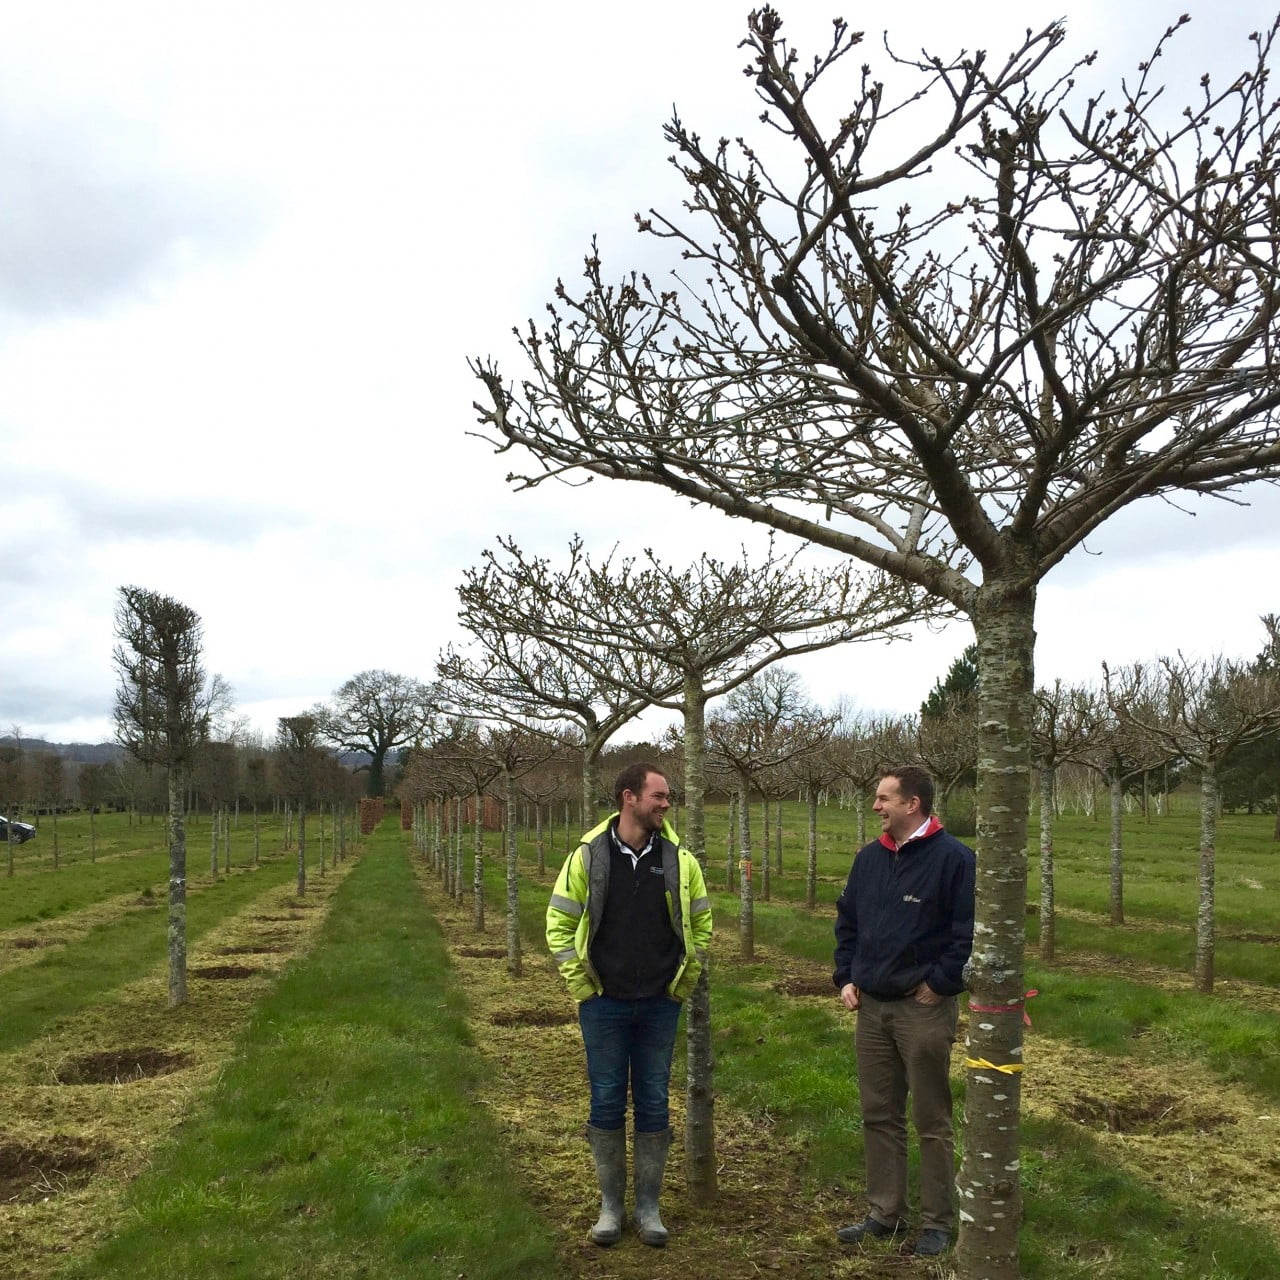 These are roof trees I have selected for my clients. They are cherries & seen here is Tom Seward my contractor & James Hillier the supplier